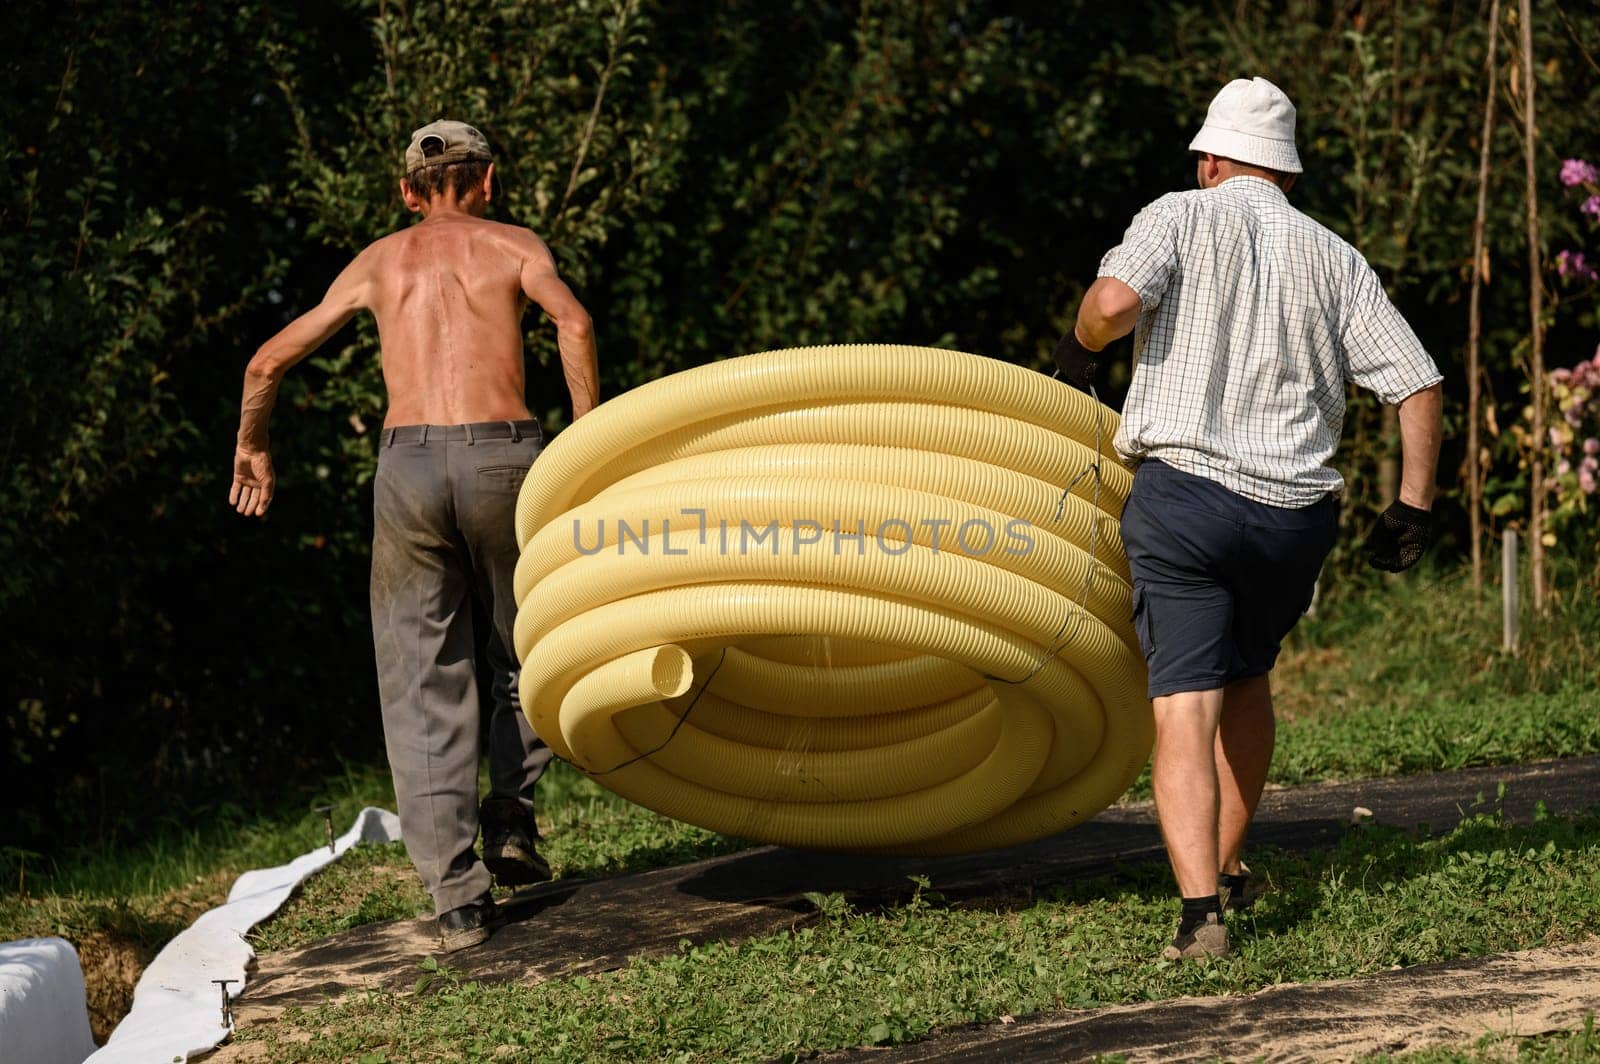 Workers carry a roll of yellow drainage pipe in their hands. Preparation for drainage works. by Niko_Cingaryuk